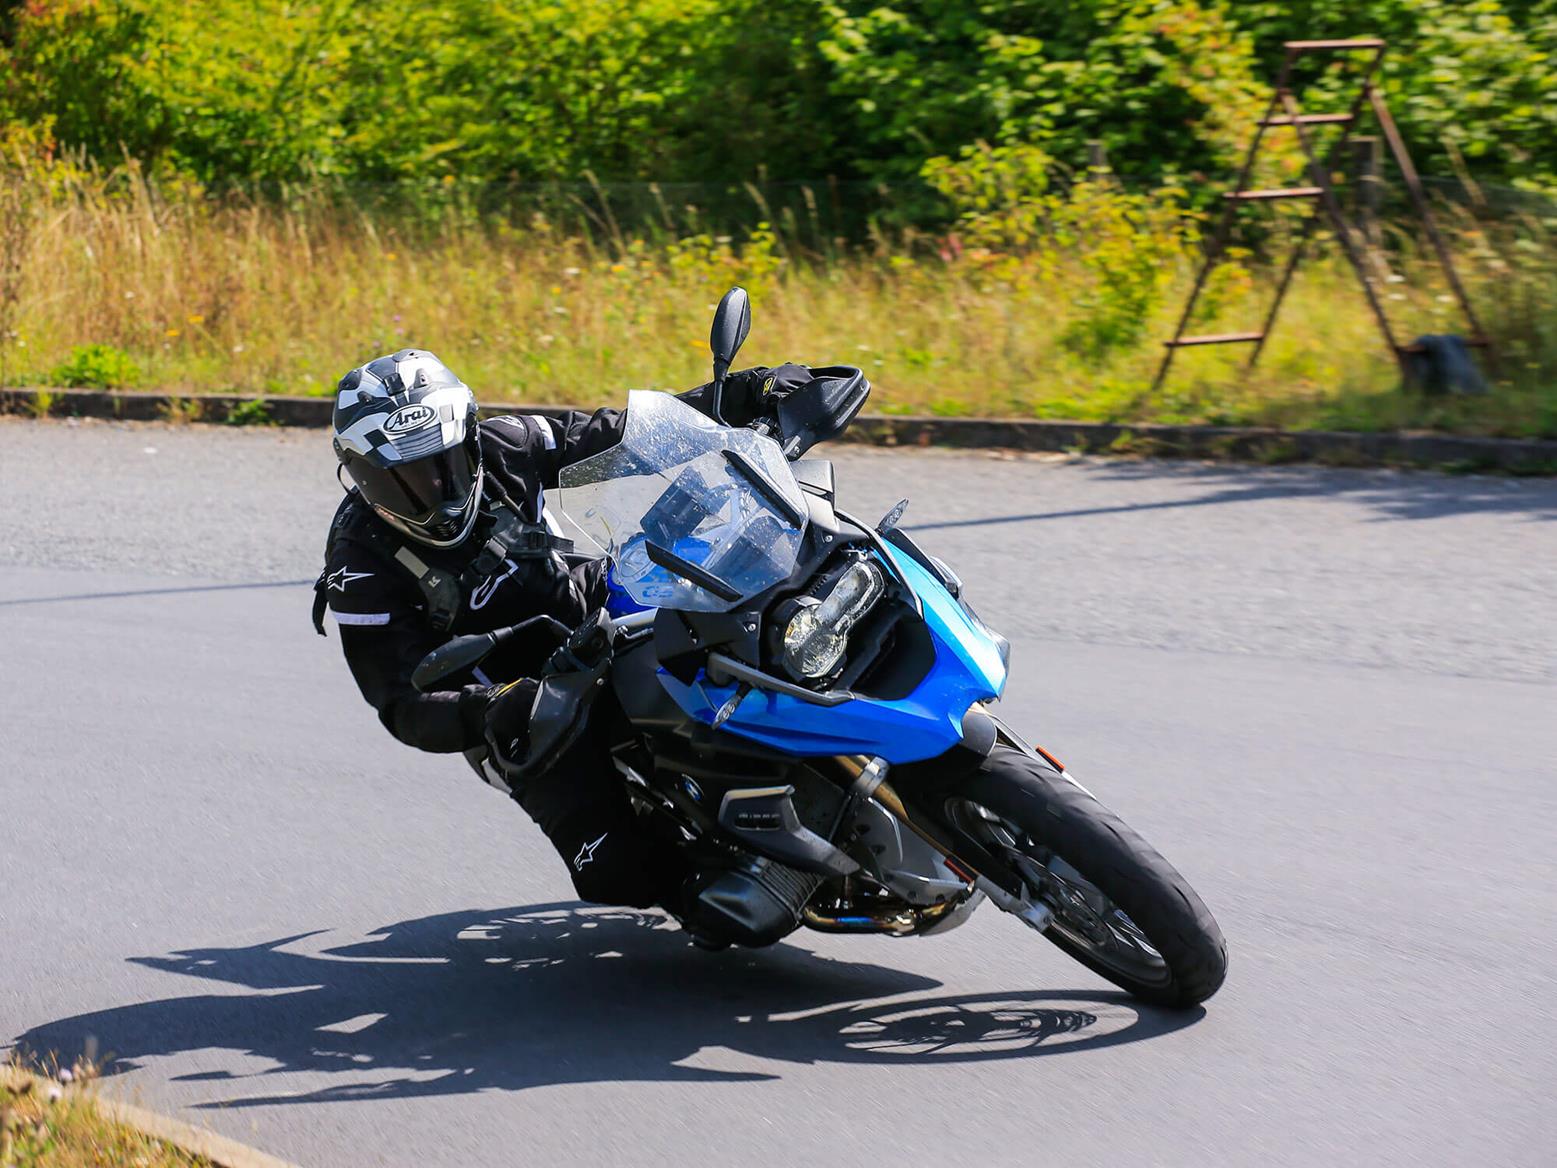 BMW GS R 1250 Rallye review - life test » The Girl On A Bike